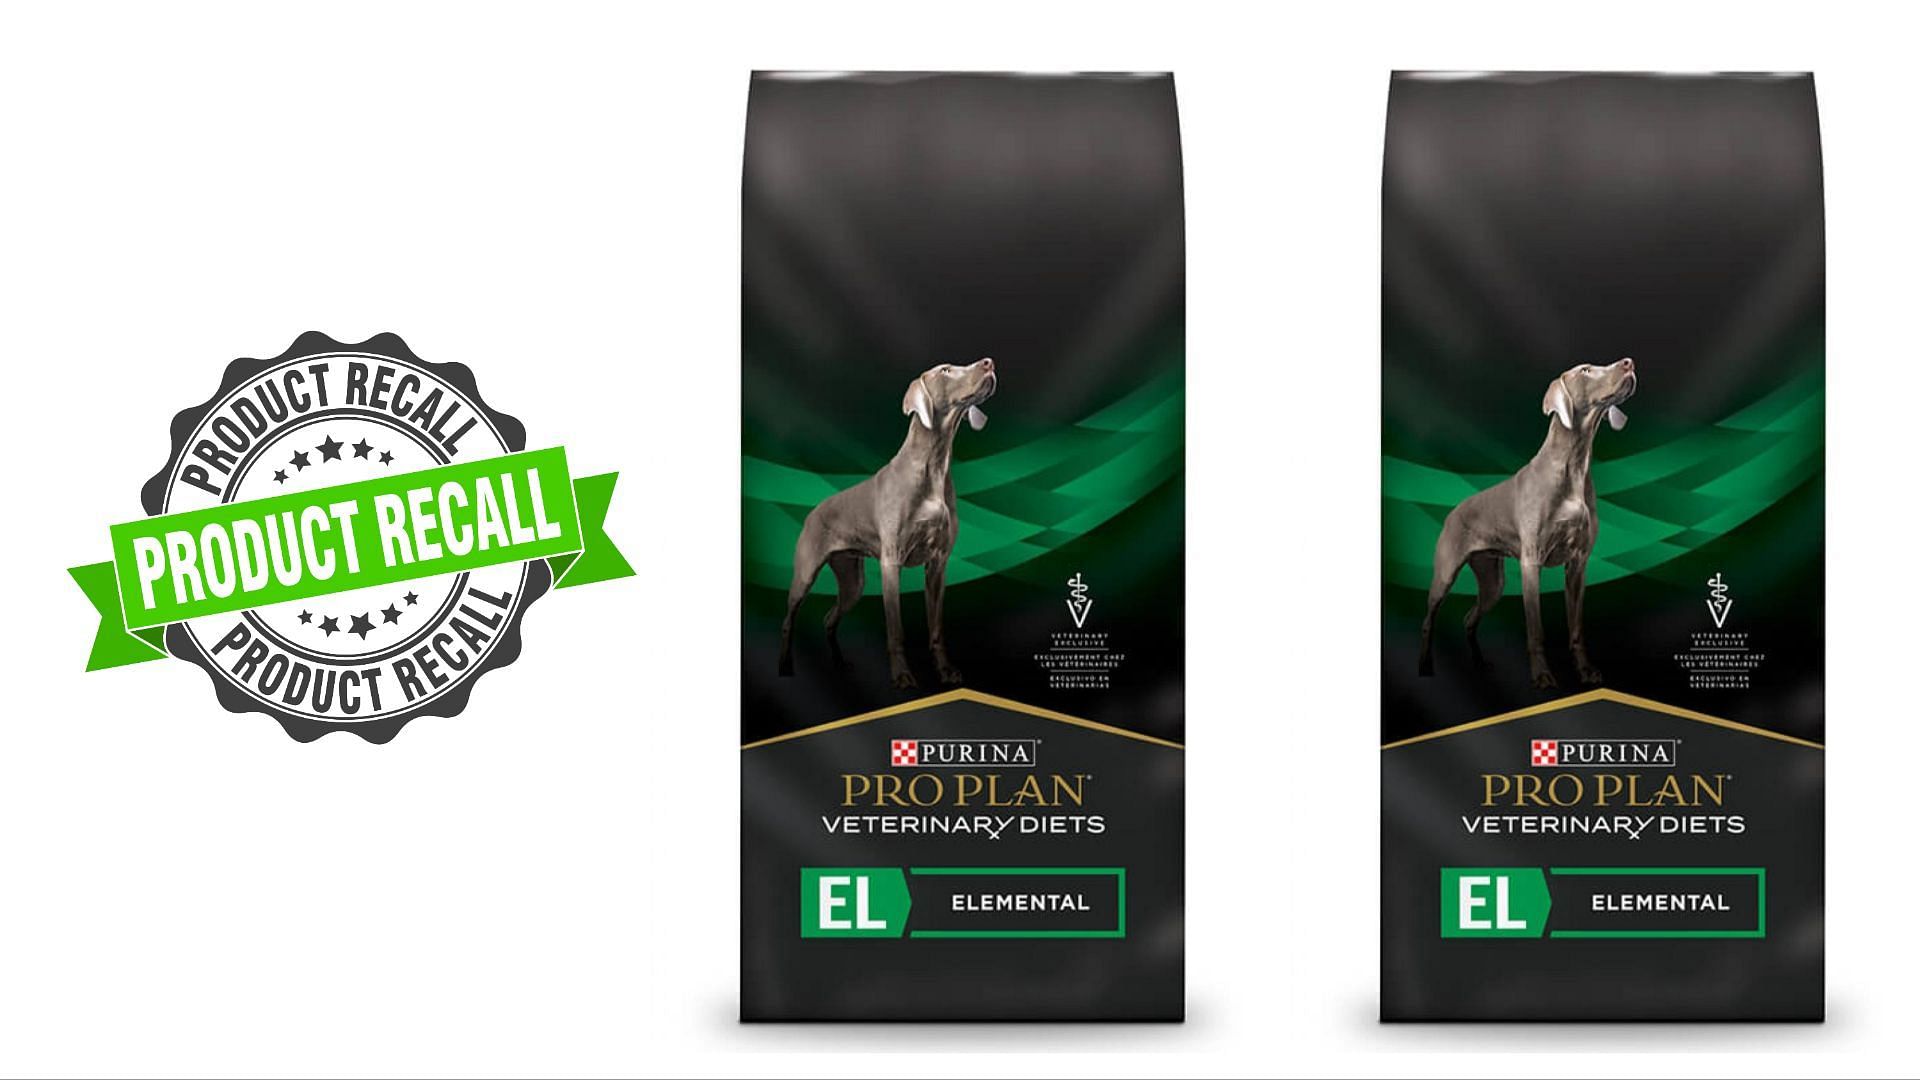 Nestl&eacute; Purina PetCare Company has expanded the recall for Purina Pro Plan Veterinary Diets EL Elemental dog food over concerns about potentially elevated Vitamin D levels (Immage via FDA)